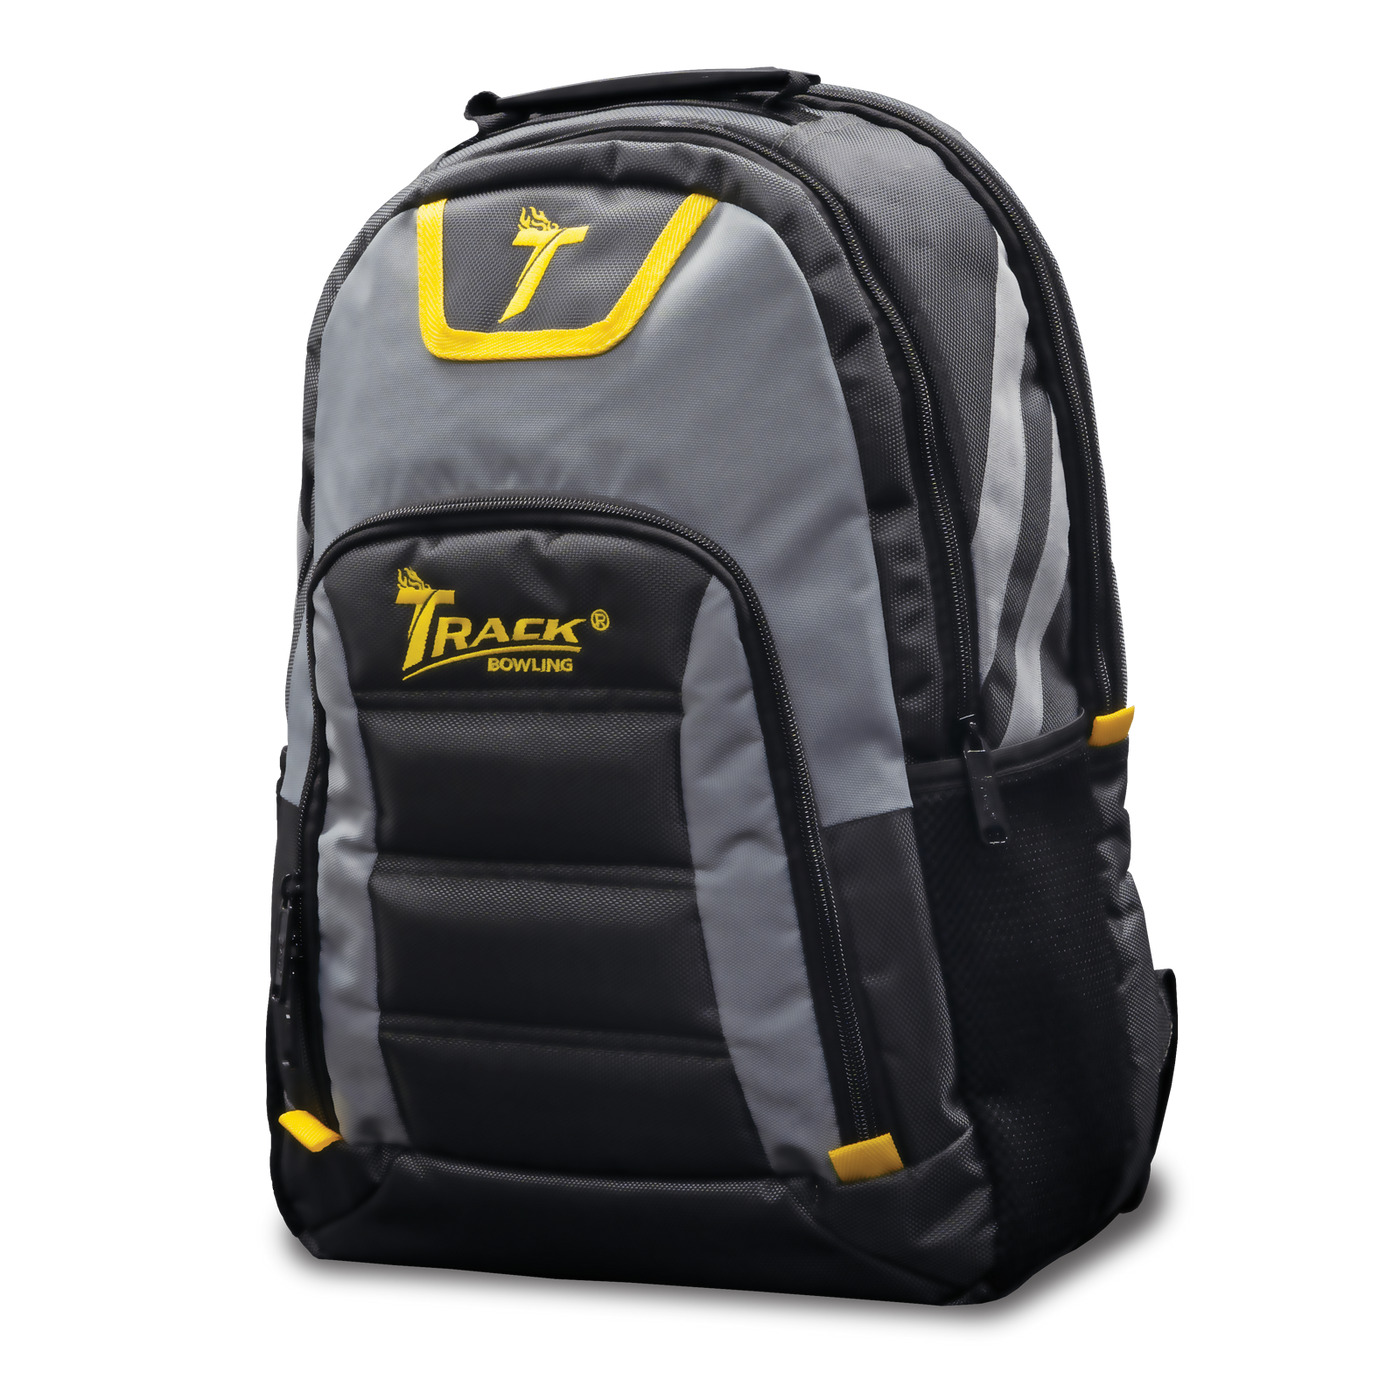 Select Backpack three-quarter view in grey, dark grey, and yellow